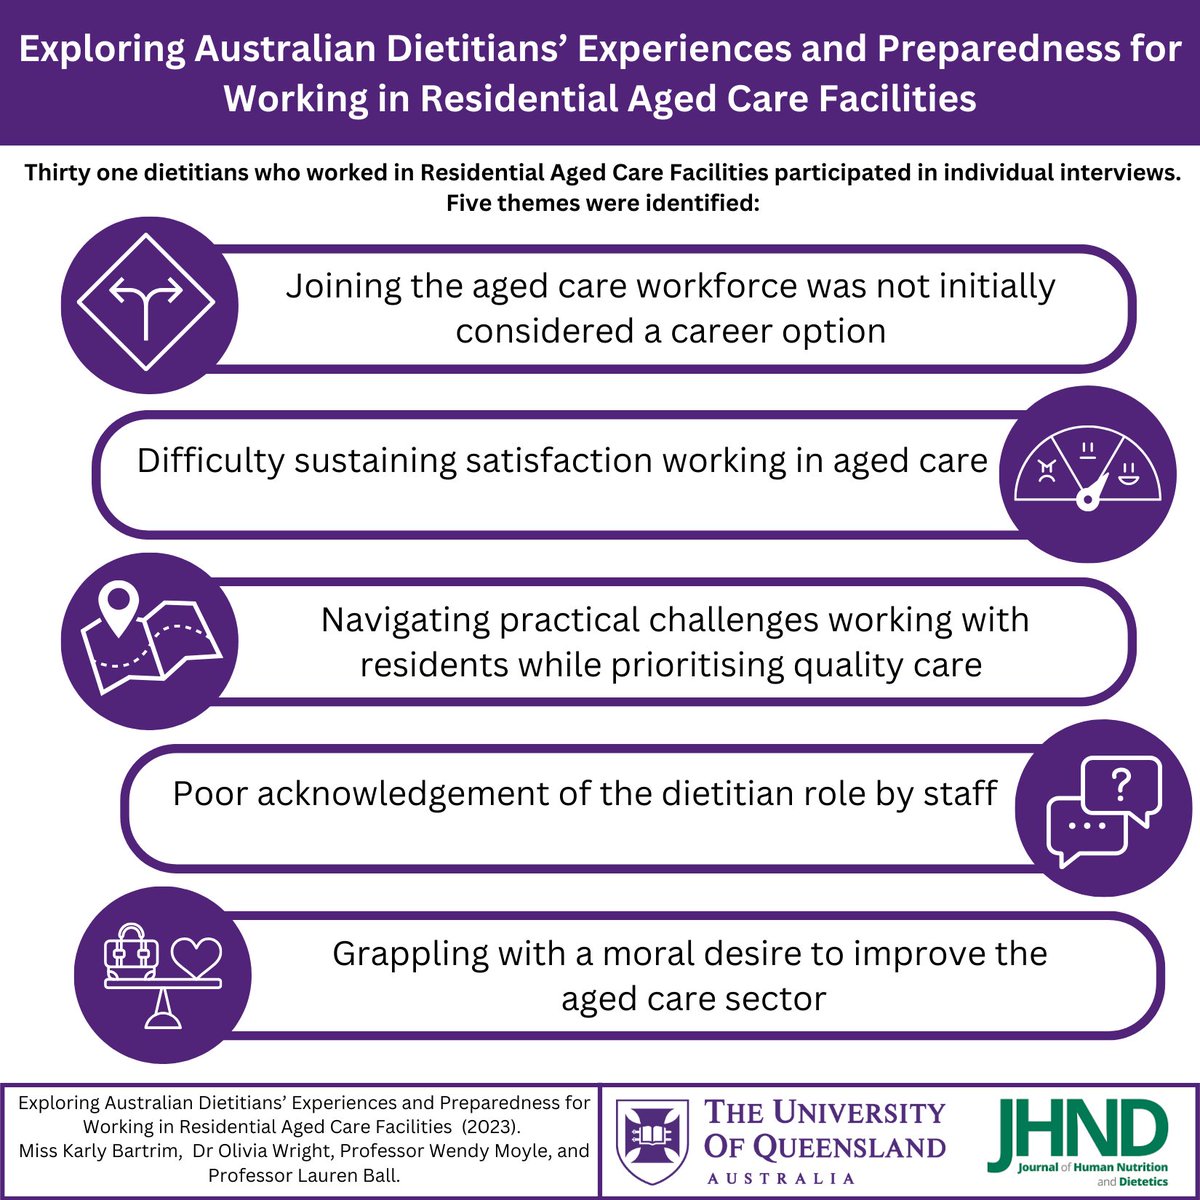 Residential #agedcare #dietitians face many challenges in fulfilling their role. System and policy changes are required to ensure older adults have access to high-quality nutrition care. onlinelibrary.wiley.com/doi/10.1111/jh… @ProfLaurenBall @OliviaRLWright @WendyMoyle2 @dietitiansaus